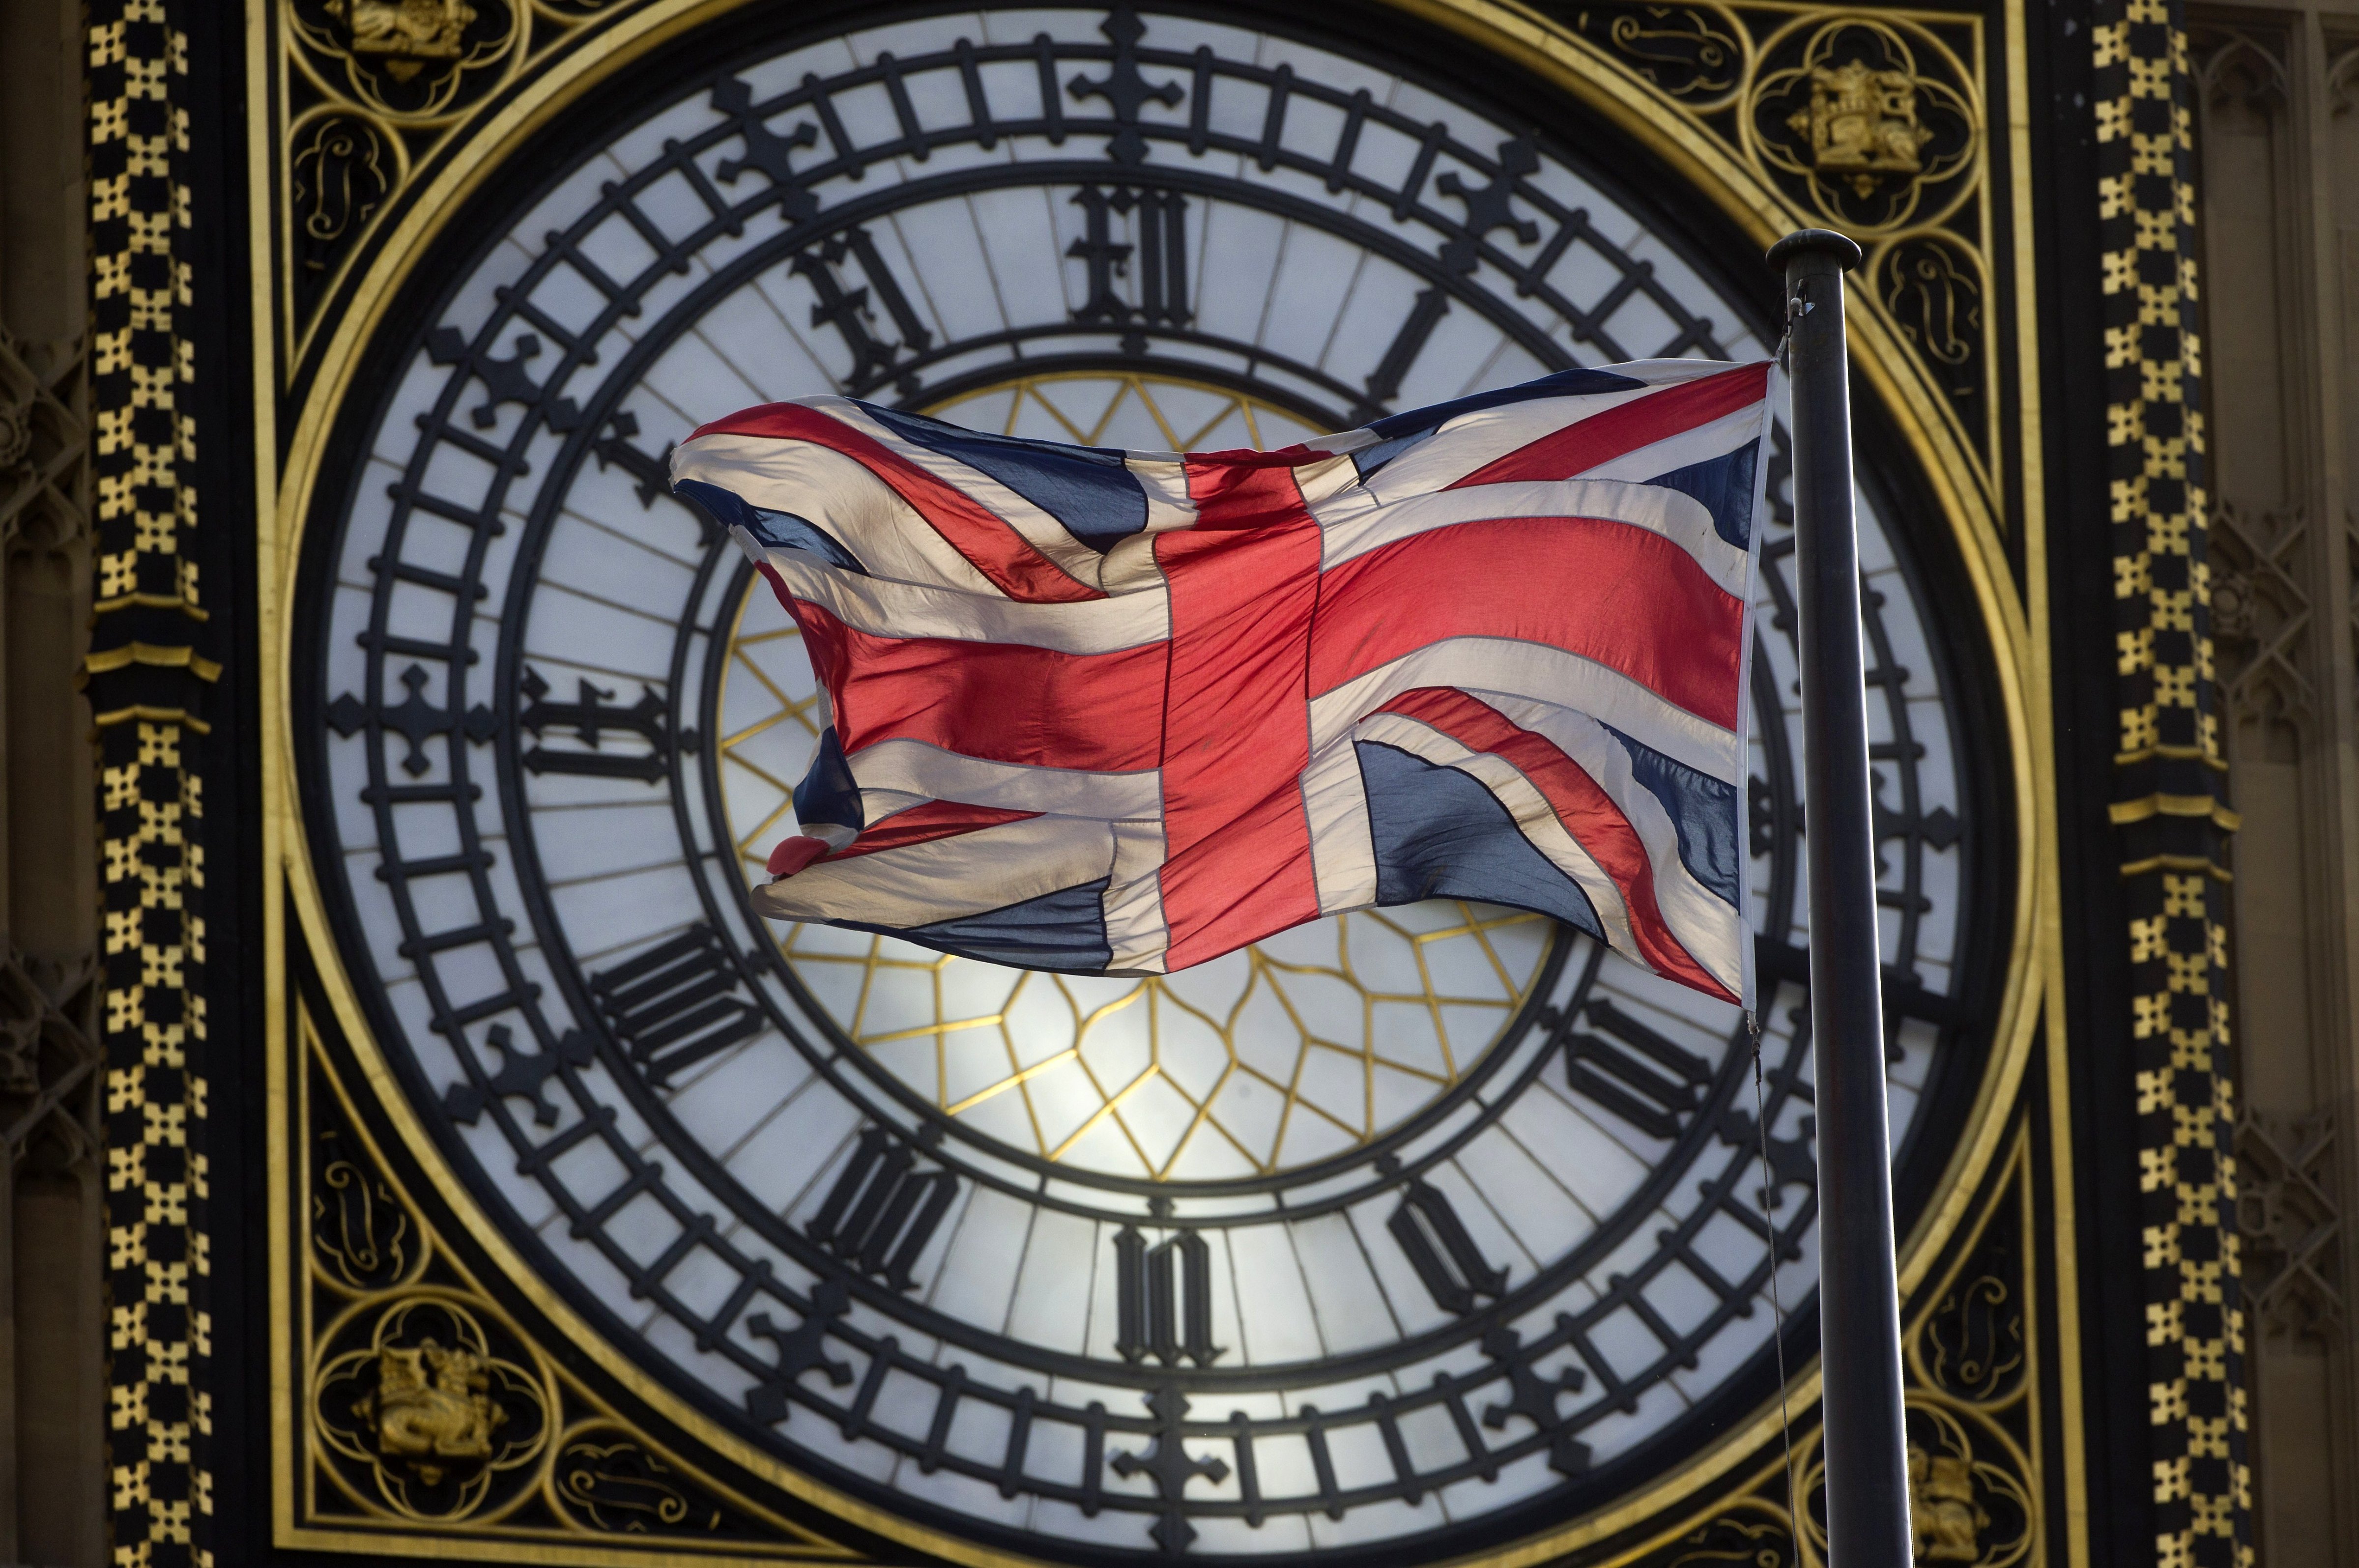 The Union flag is seen flapping in the wind in front of one of the faces of the Great Clock atop the landmark Elizabeth Tower that houses Big Ben at the Houses of Parliament. (Justin Tallis&mdash;AFP/Getty Images)